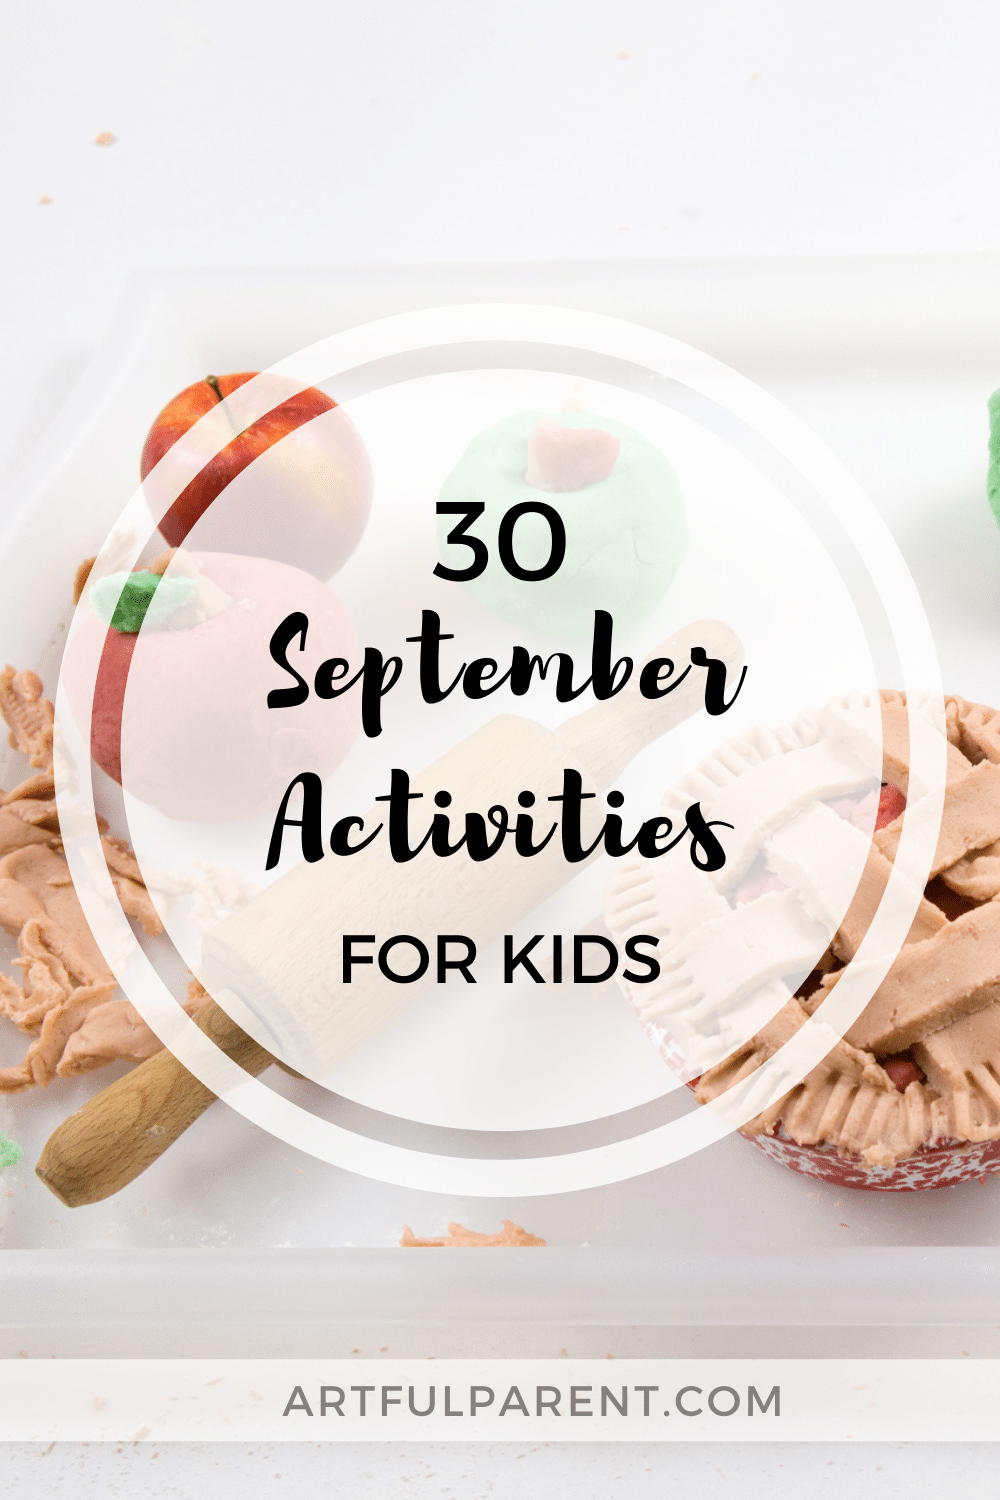 30 Creative September Activities for Kids (with Printable List)